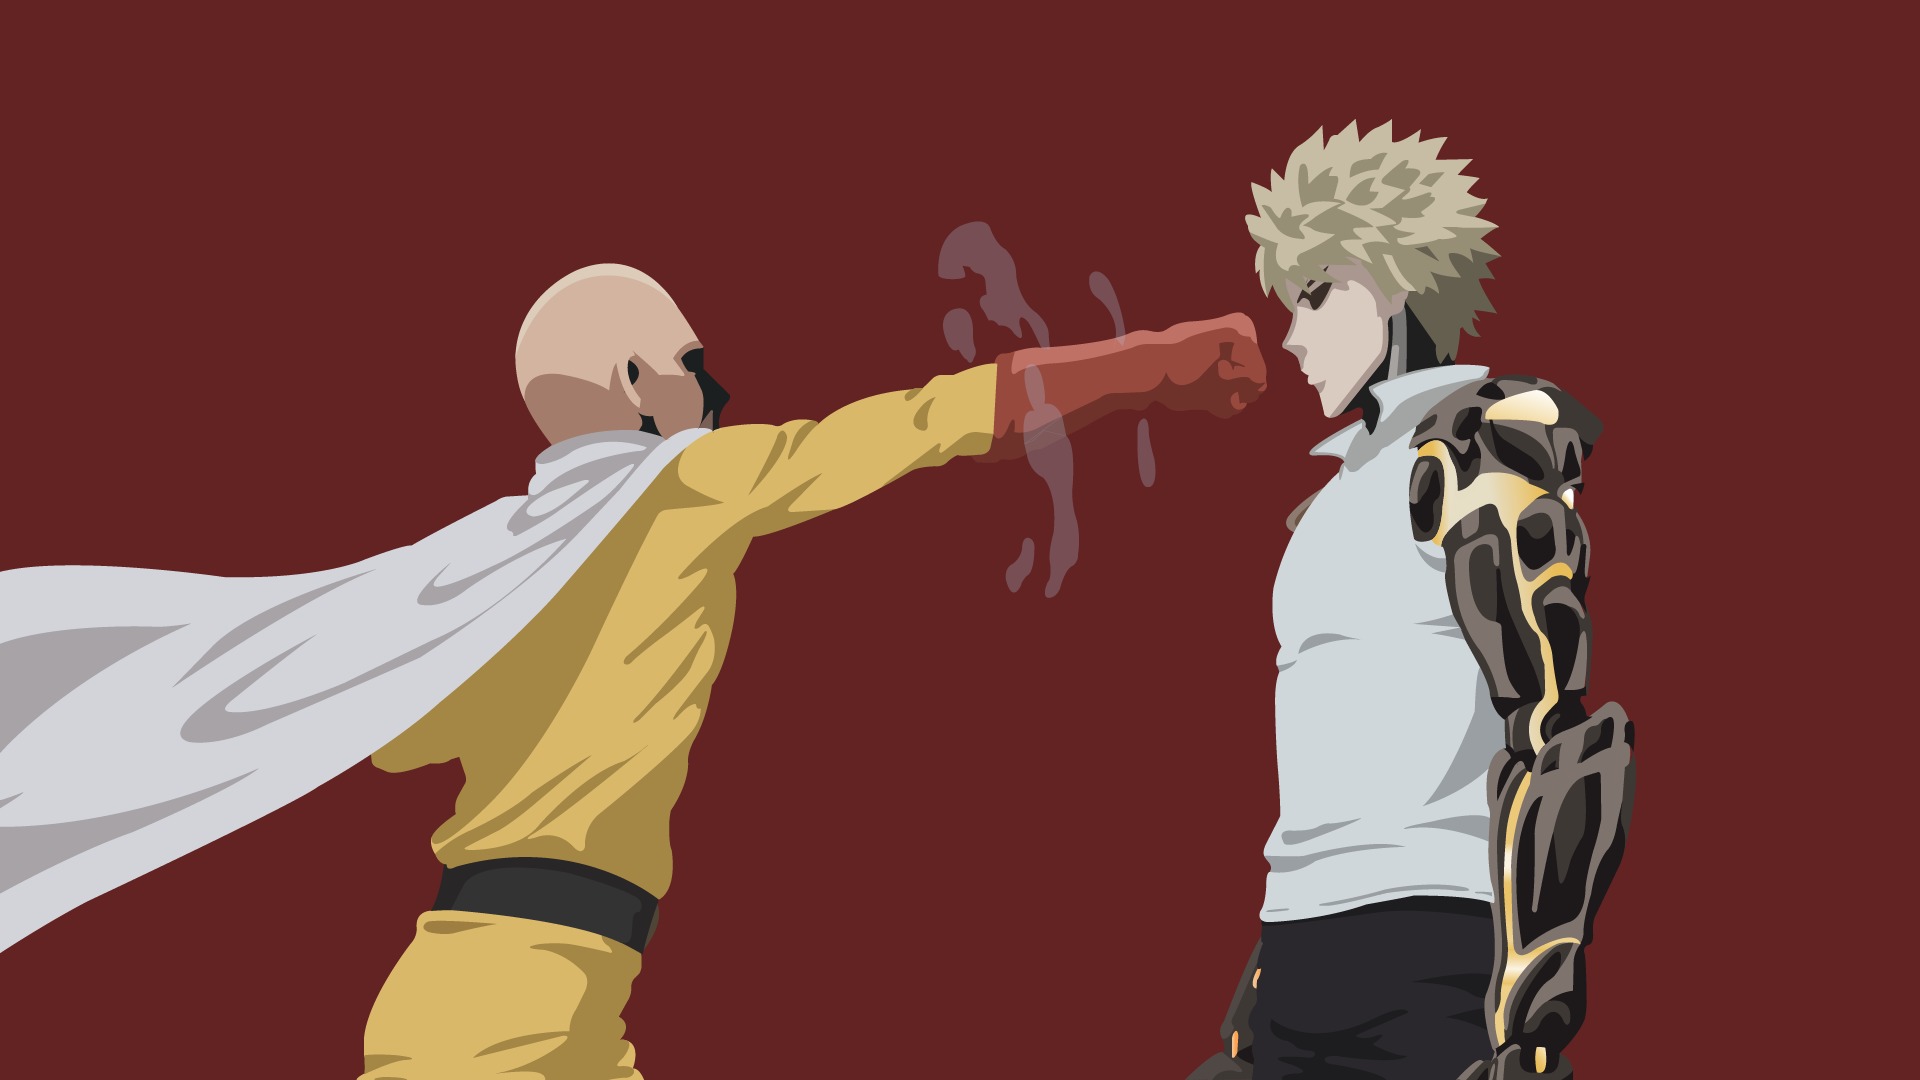 650+ Anime One-Punch Man HD Wallpapers and Backgrounds